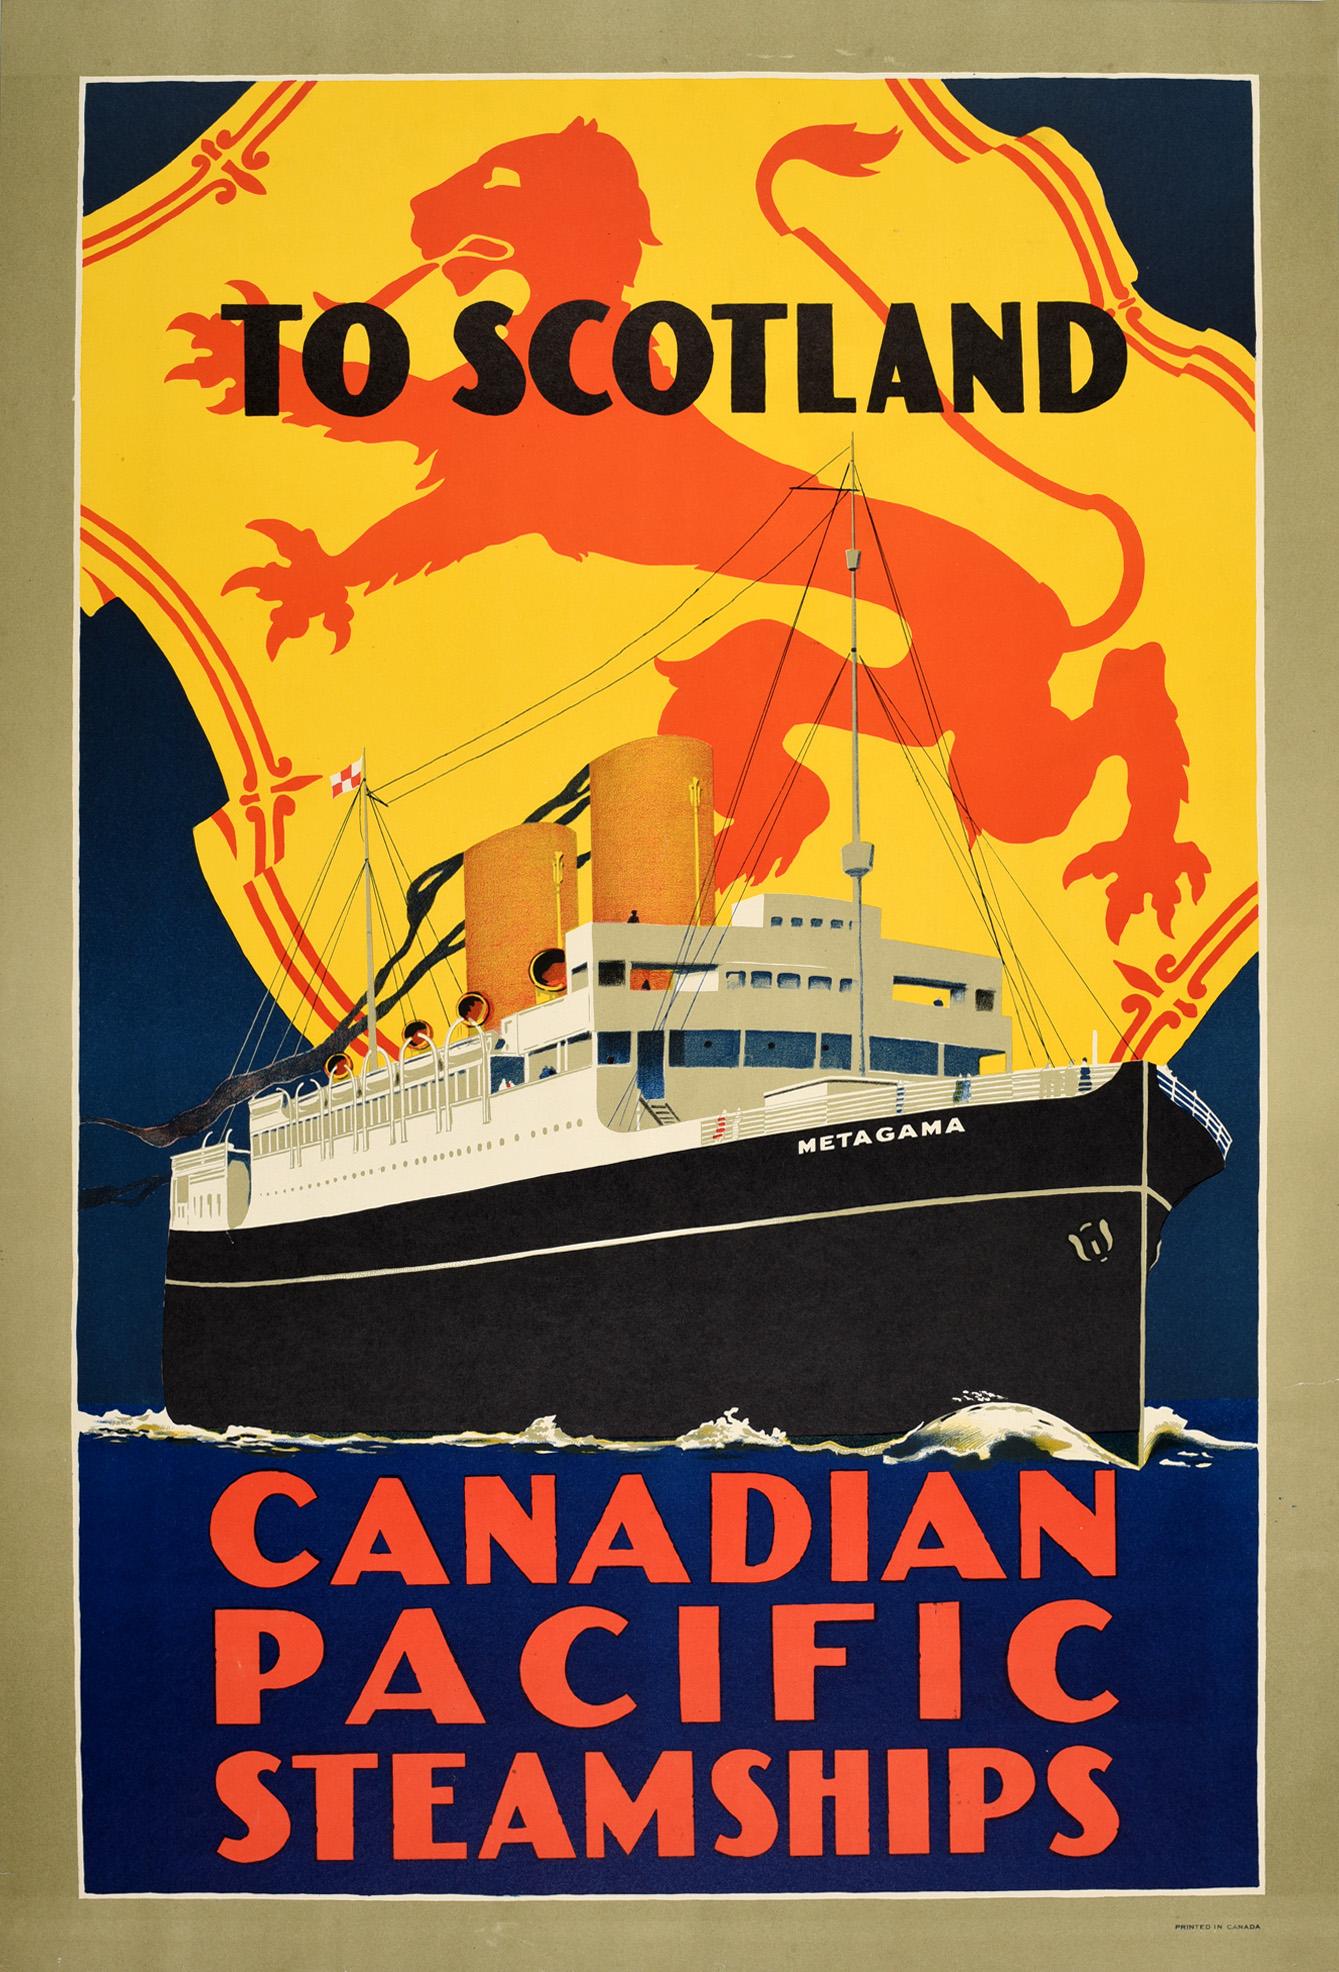 Unknown Print - Original Vintage Cruise Travel Poster Scotland Canadian Pacific Steamships Lion